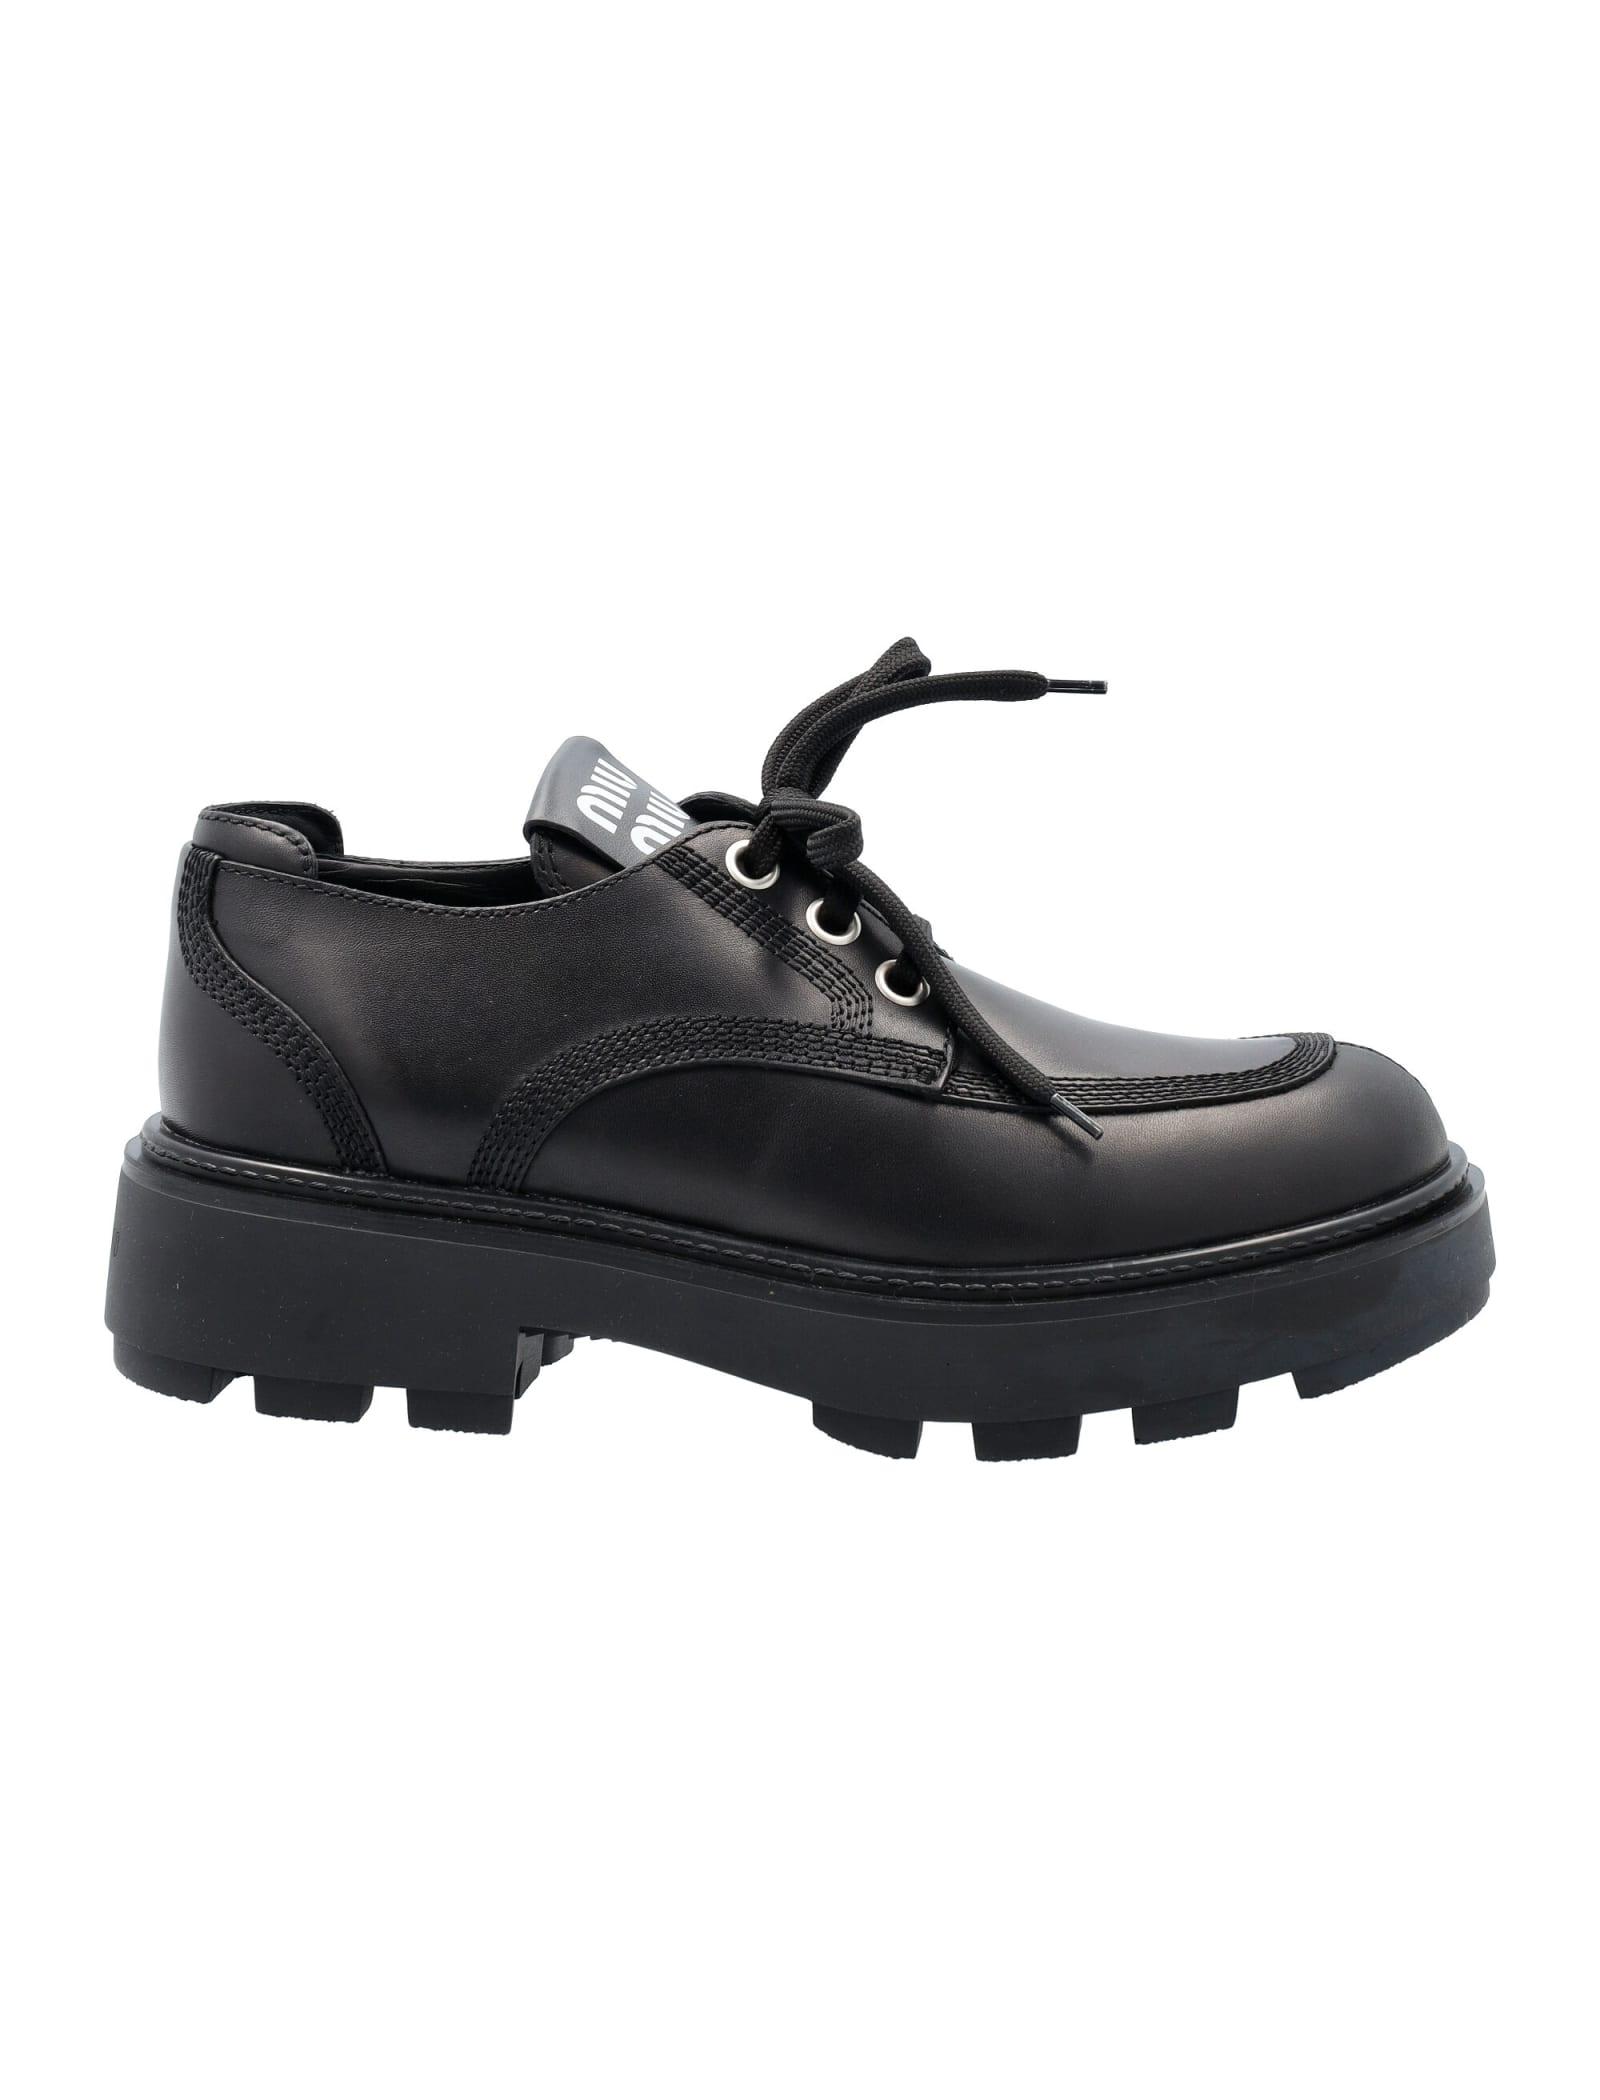 Miu Miu Leather Lace-up Shoes in Black - Lyst